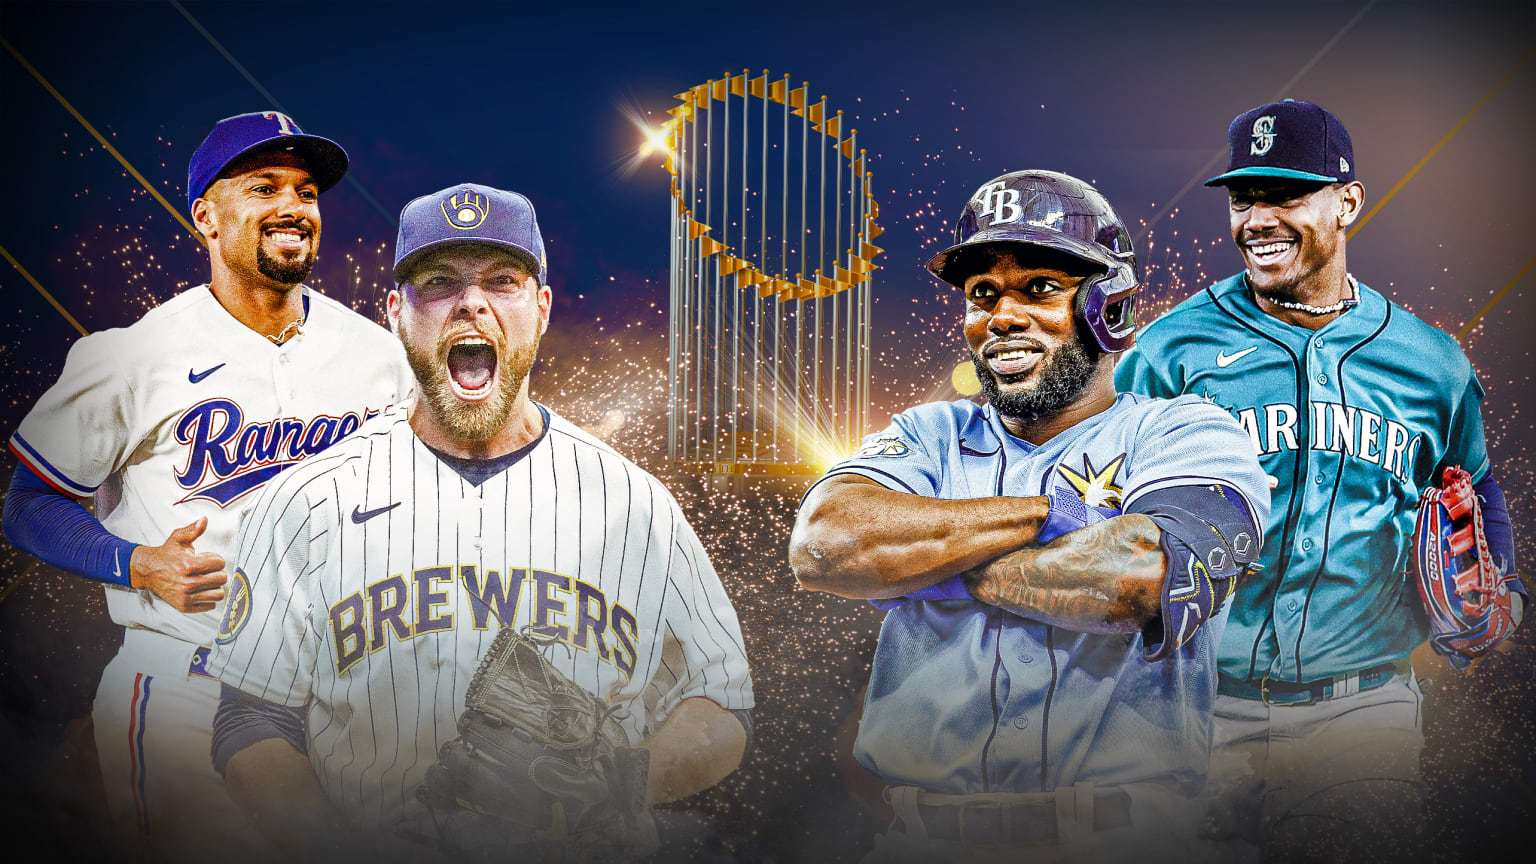 A photo illustration with players from the Rangers, Brewers, Rays and Mariners